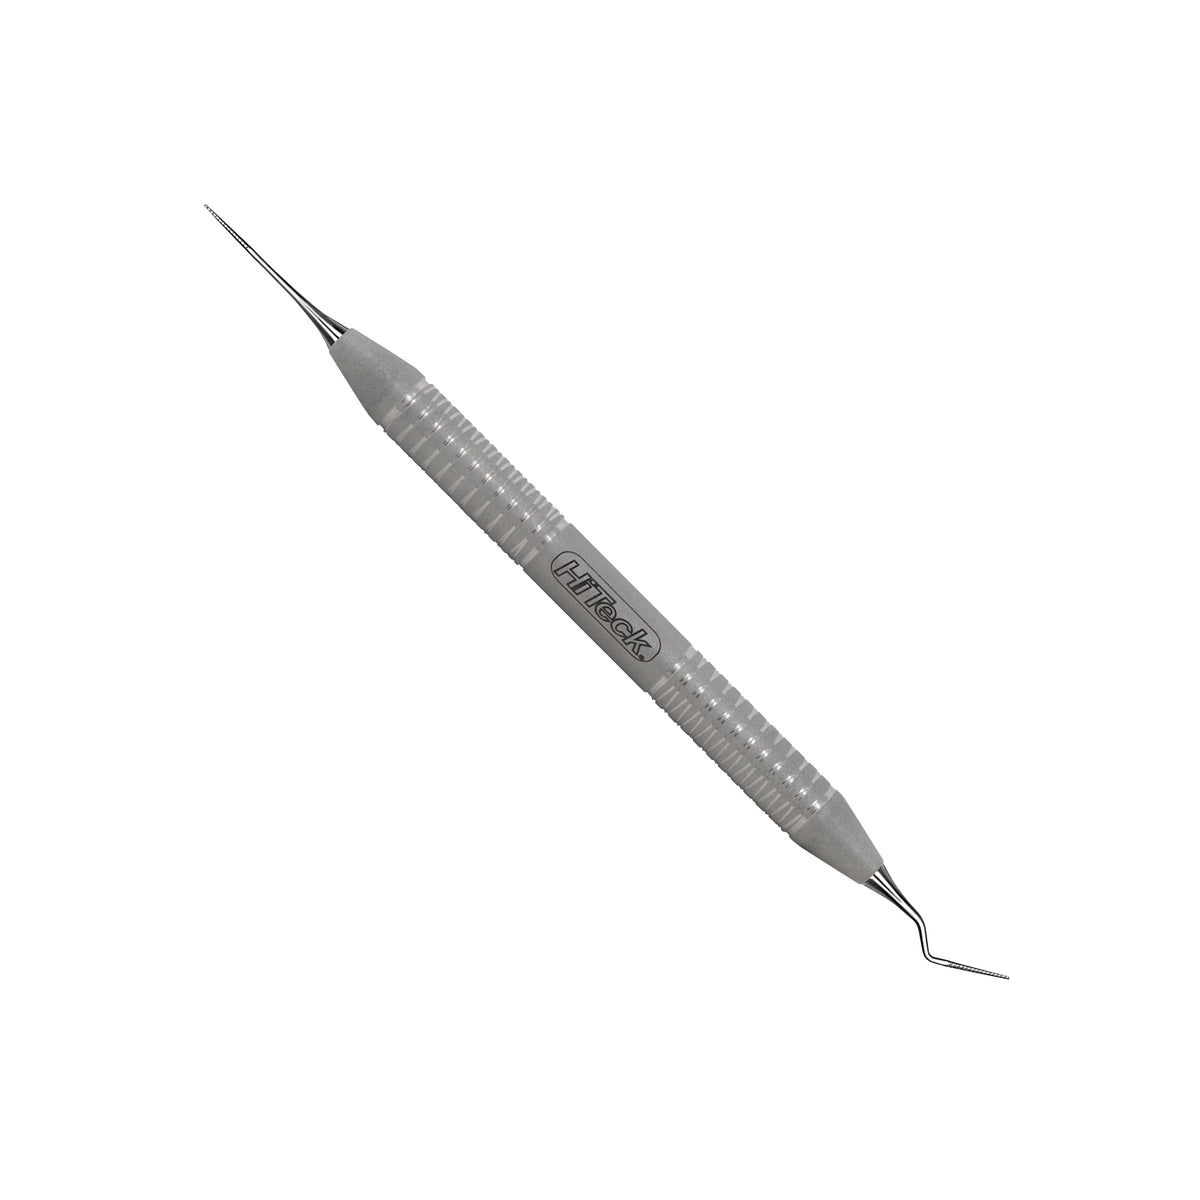 11/12 Buck Straight File Periodontal File - HiTeck Medical Instruments